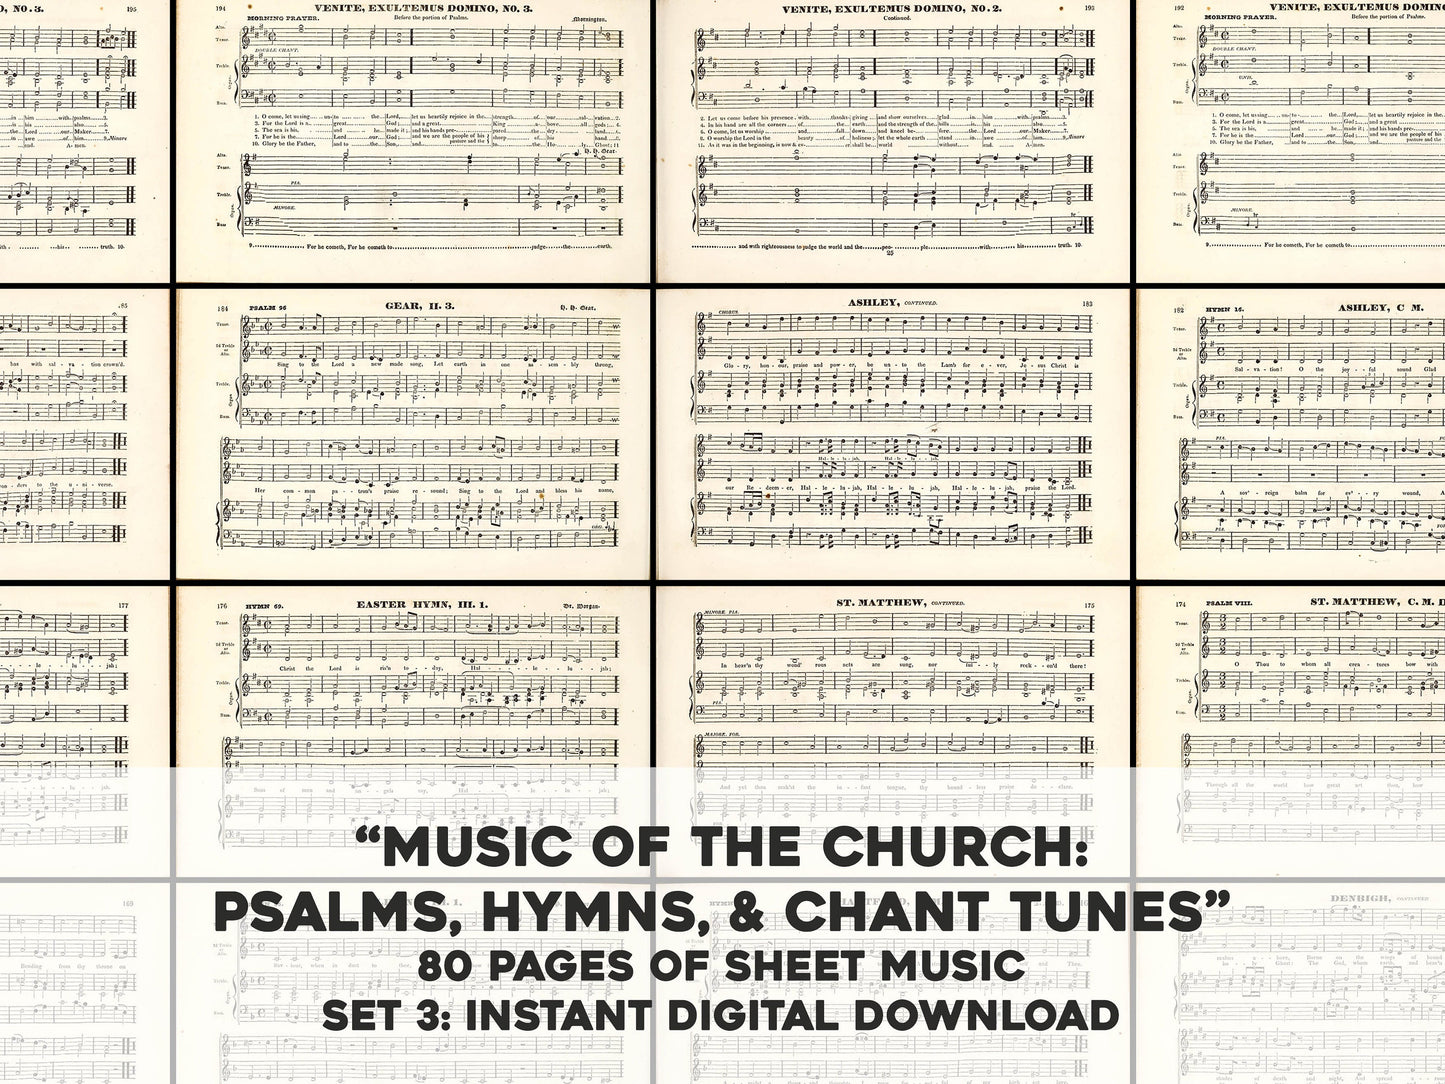 Music of the Church: Songs Hymns & Chant Tunes Set 3 [80 Images]